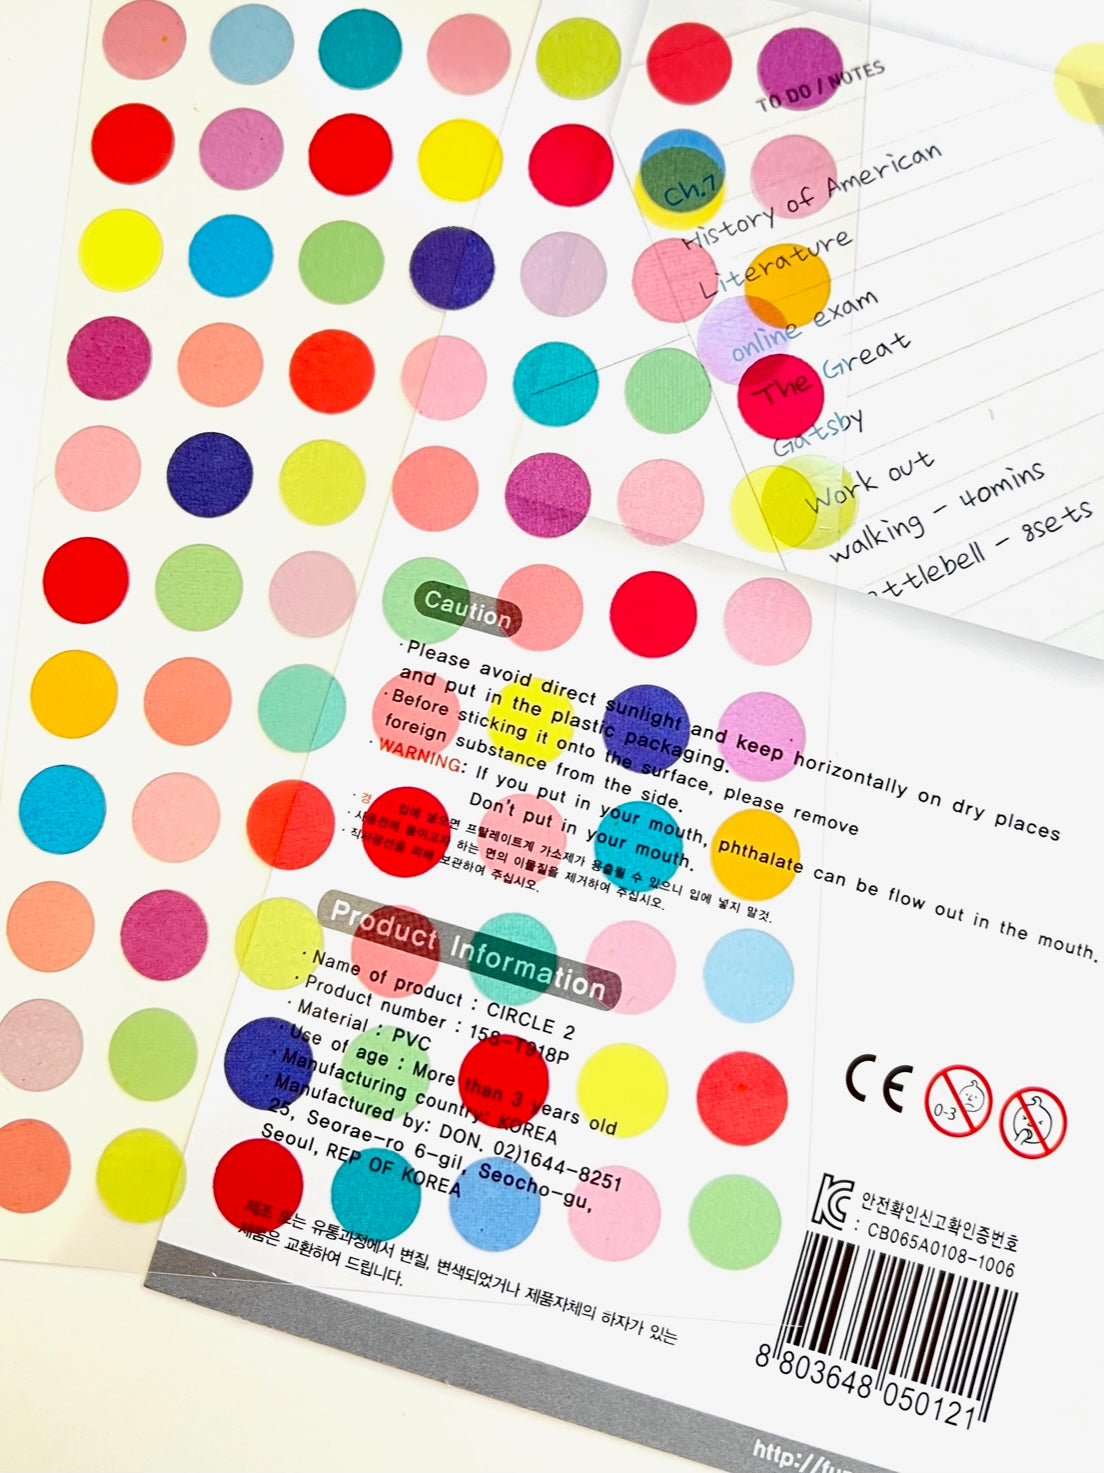 40121 COLOR CIRCLES STICKERS-12